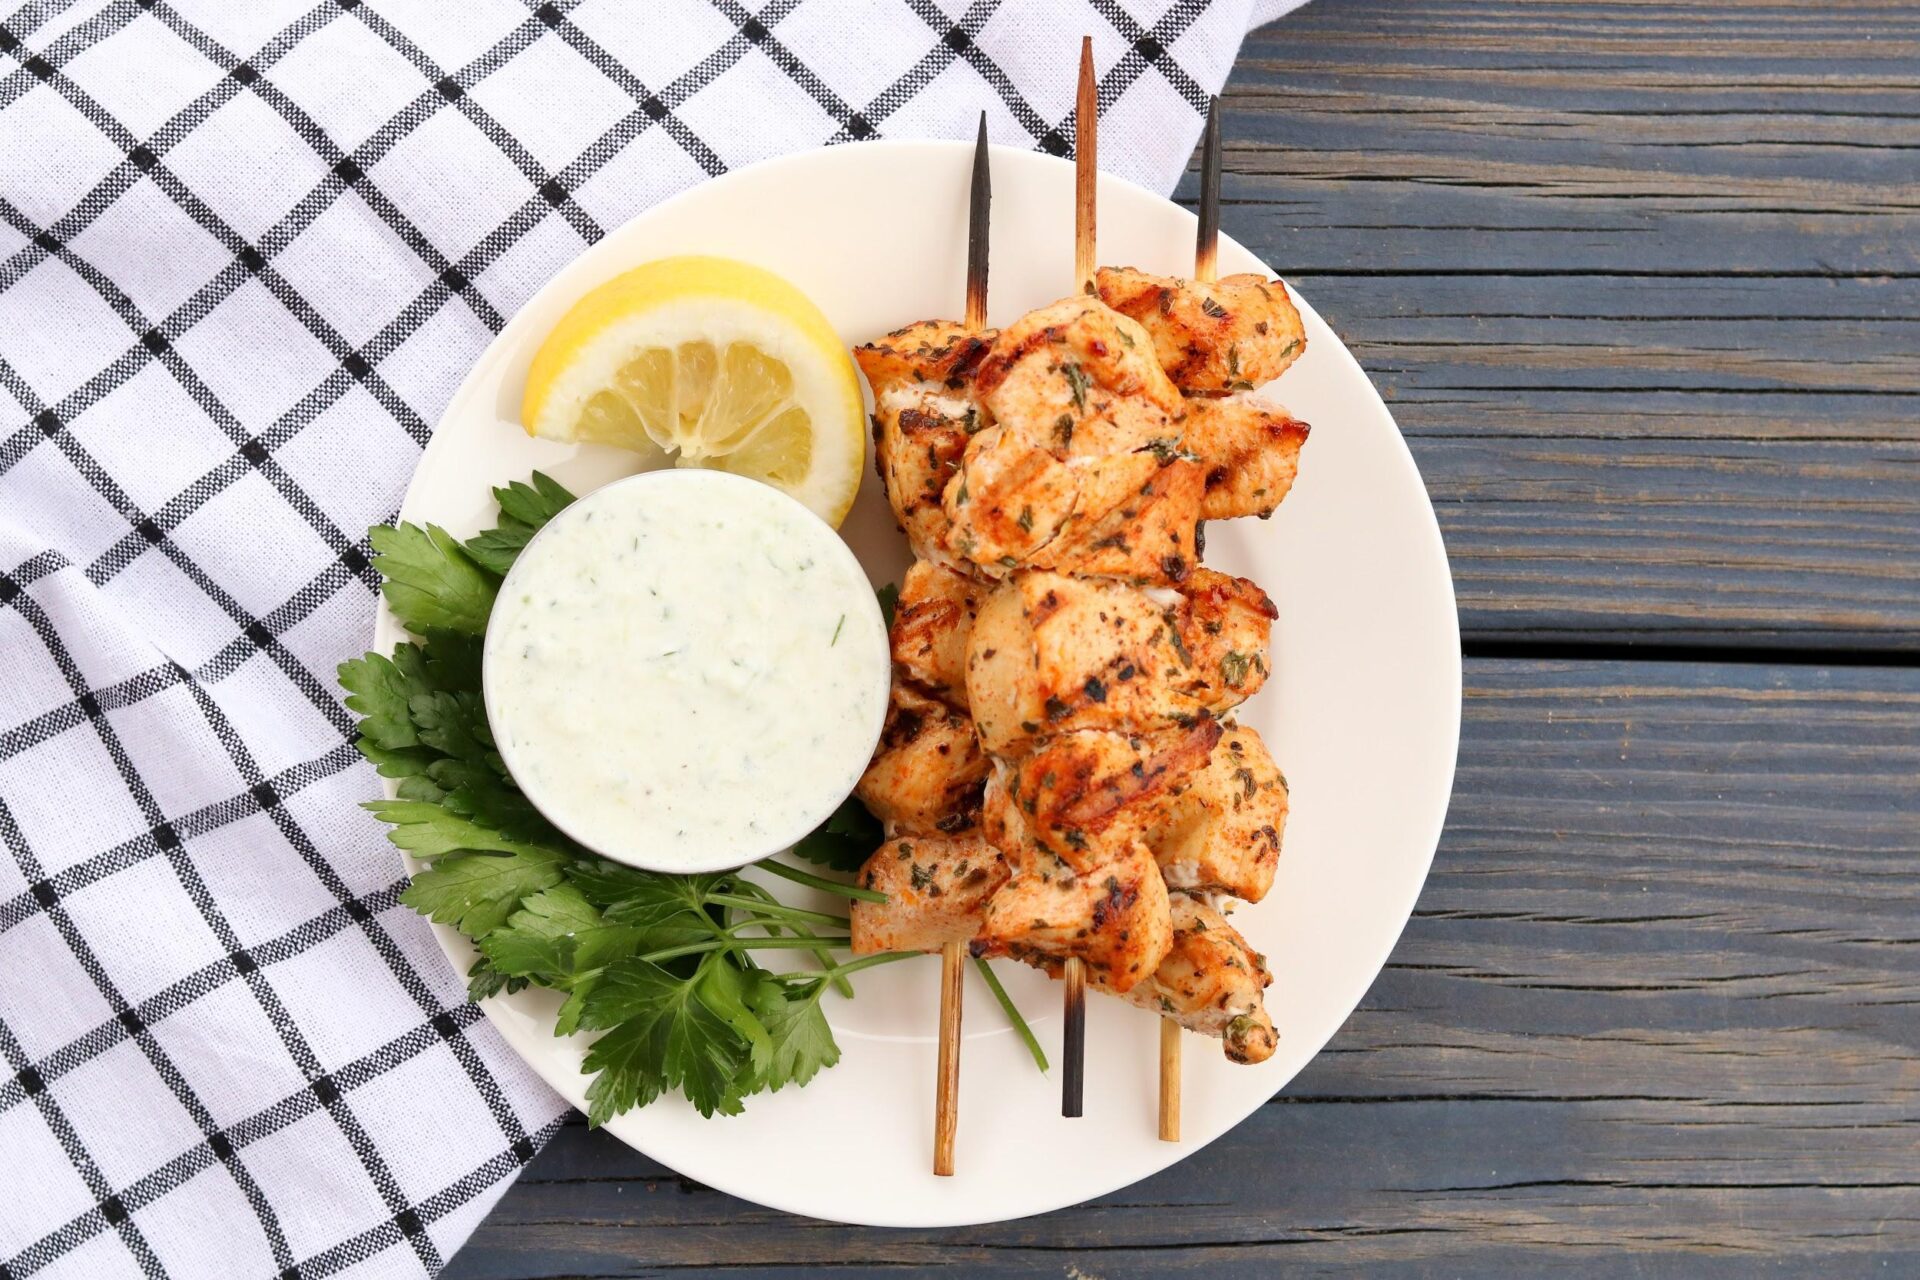 Greek Chicken Kebobs on white plate skewered with blue check napkin